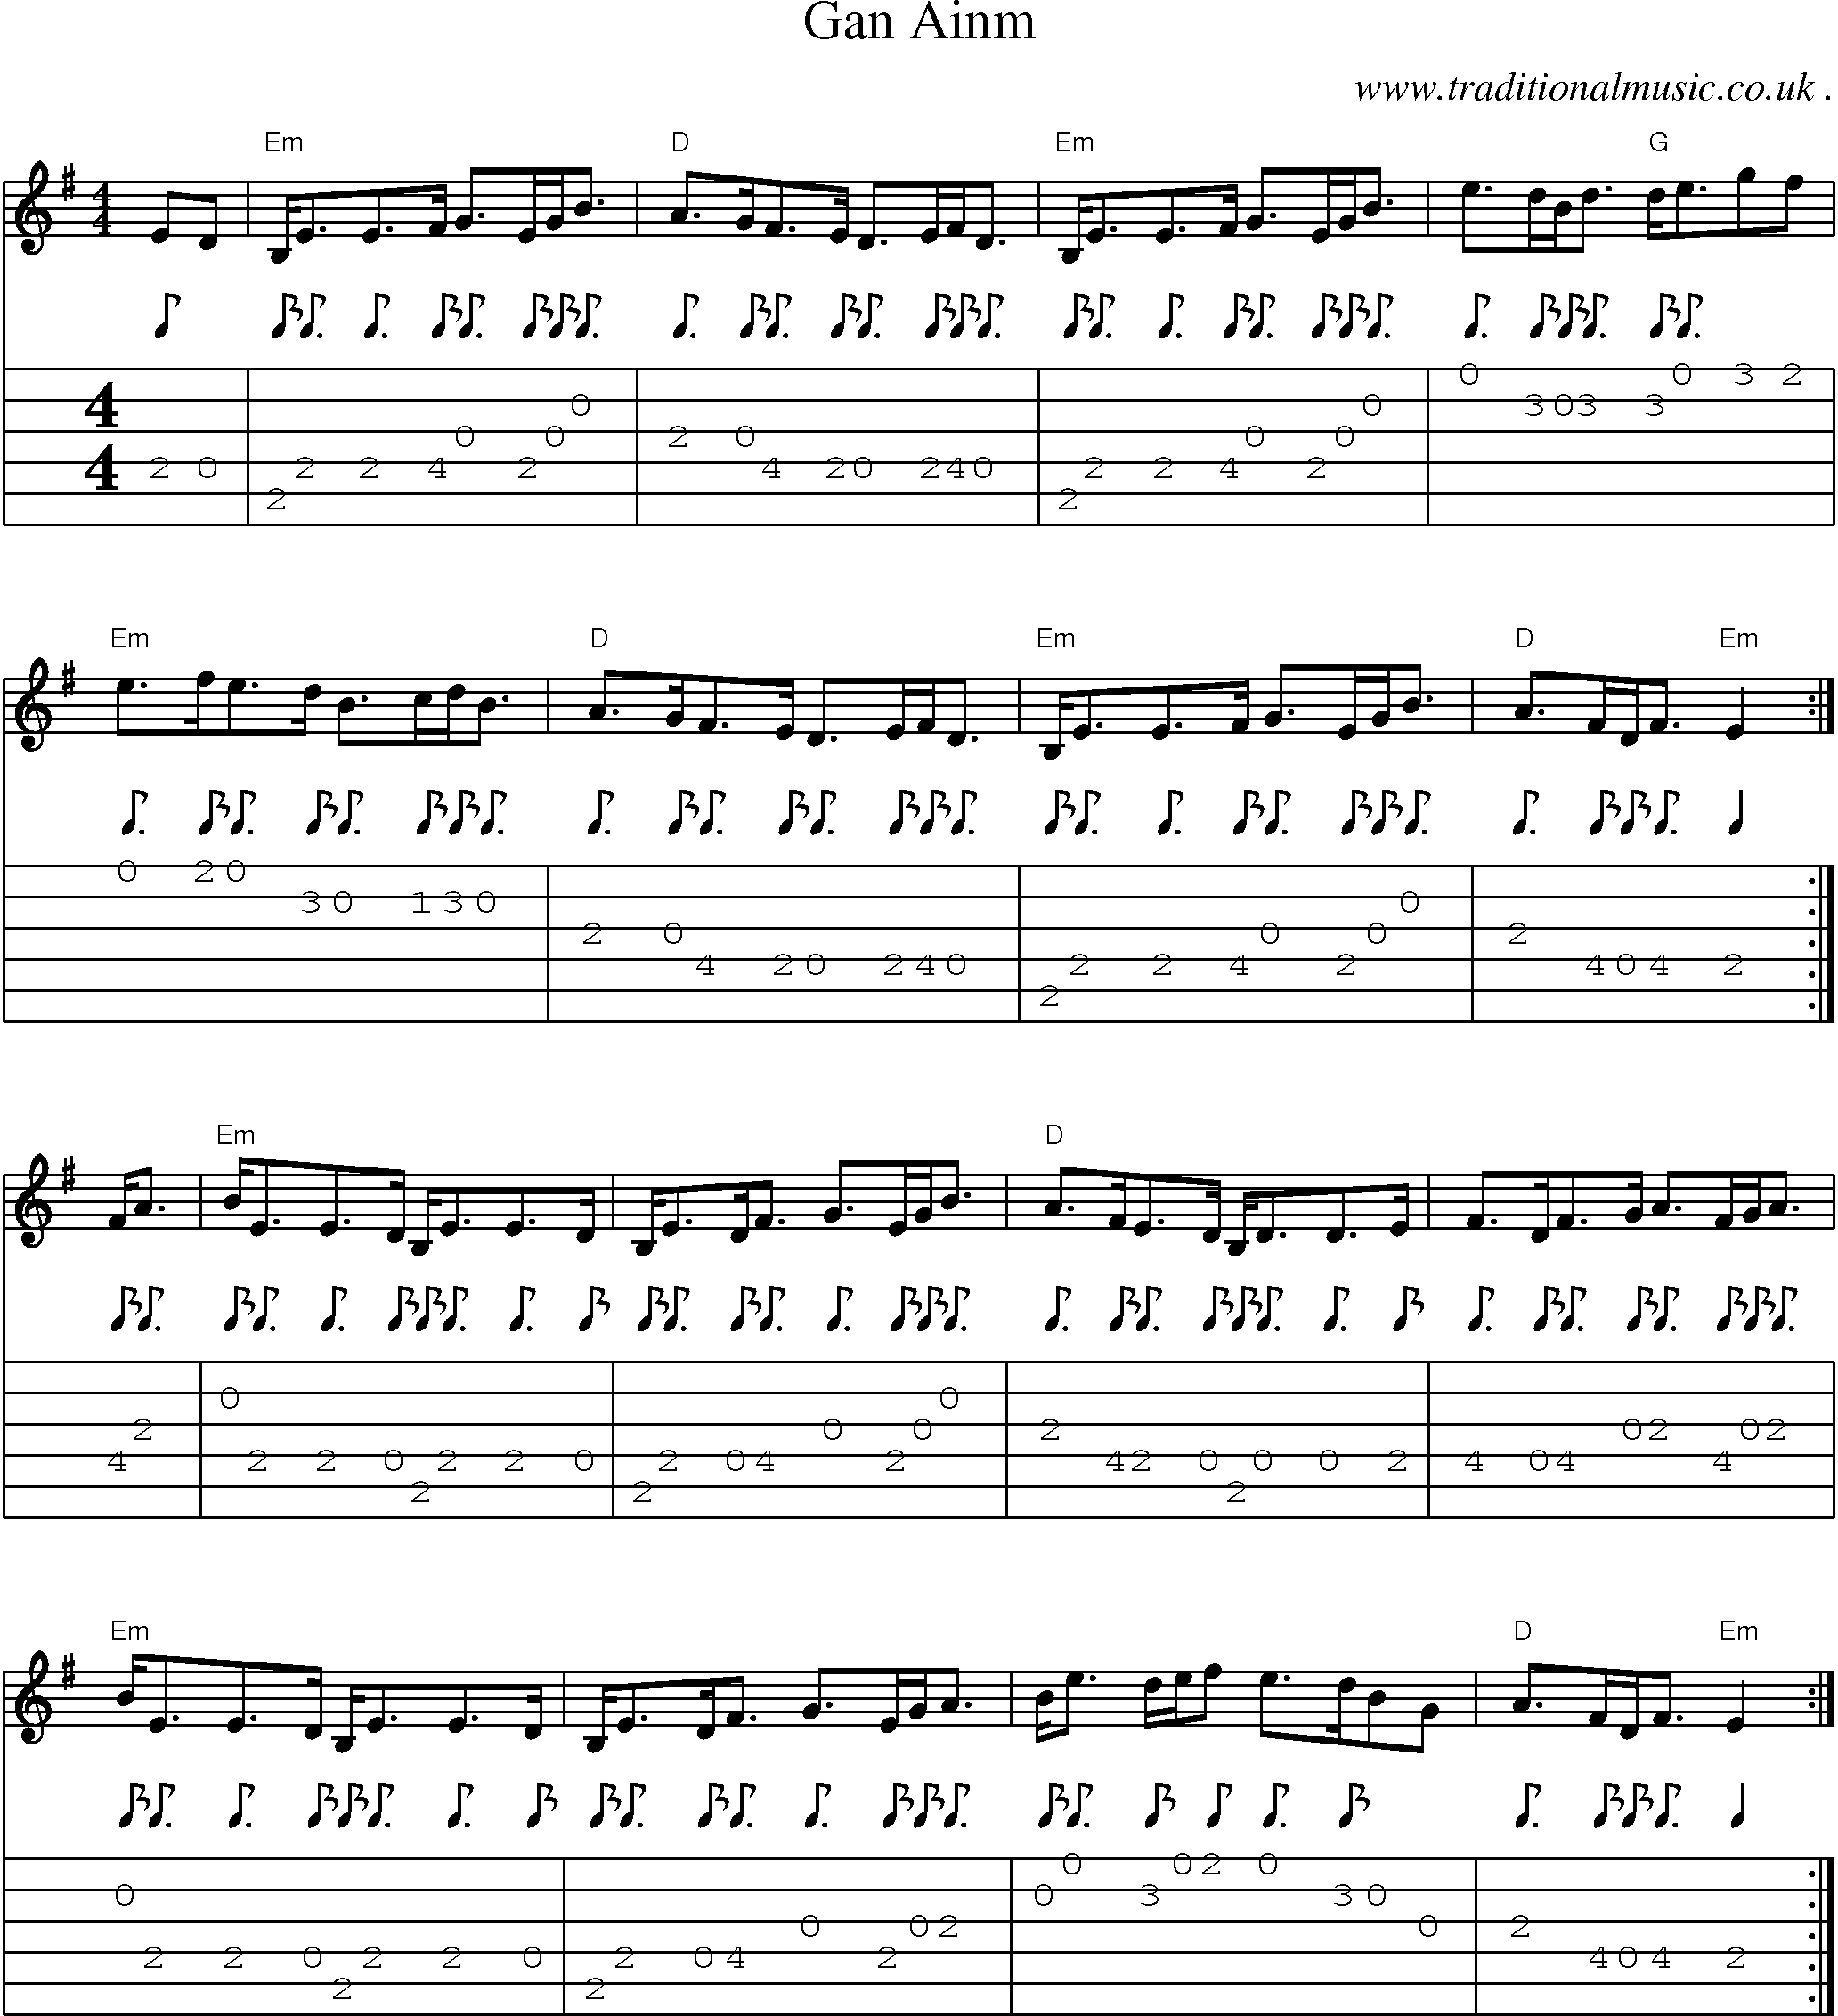 Sheet-music  score, Chords and Guitar Tabs for Gan Ainm